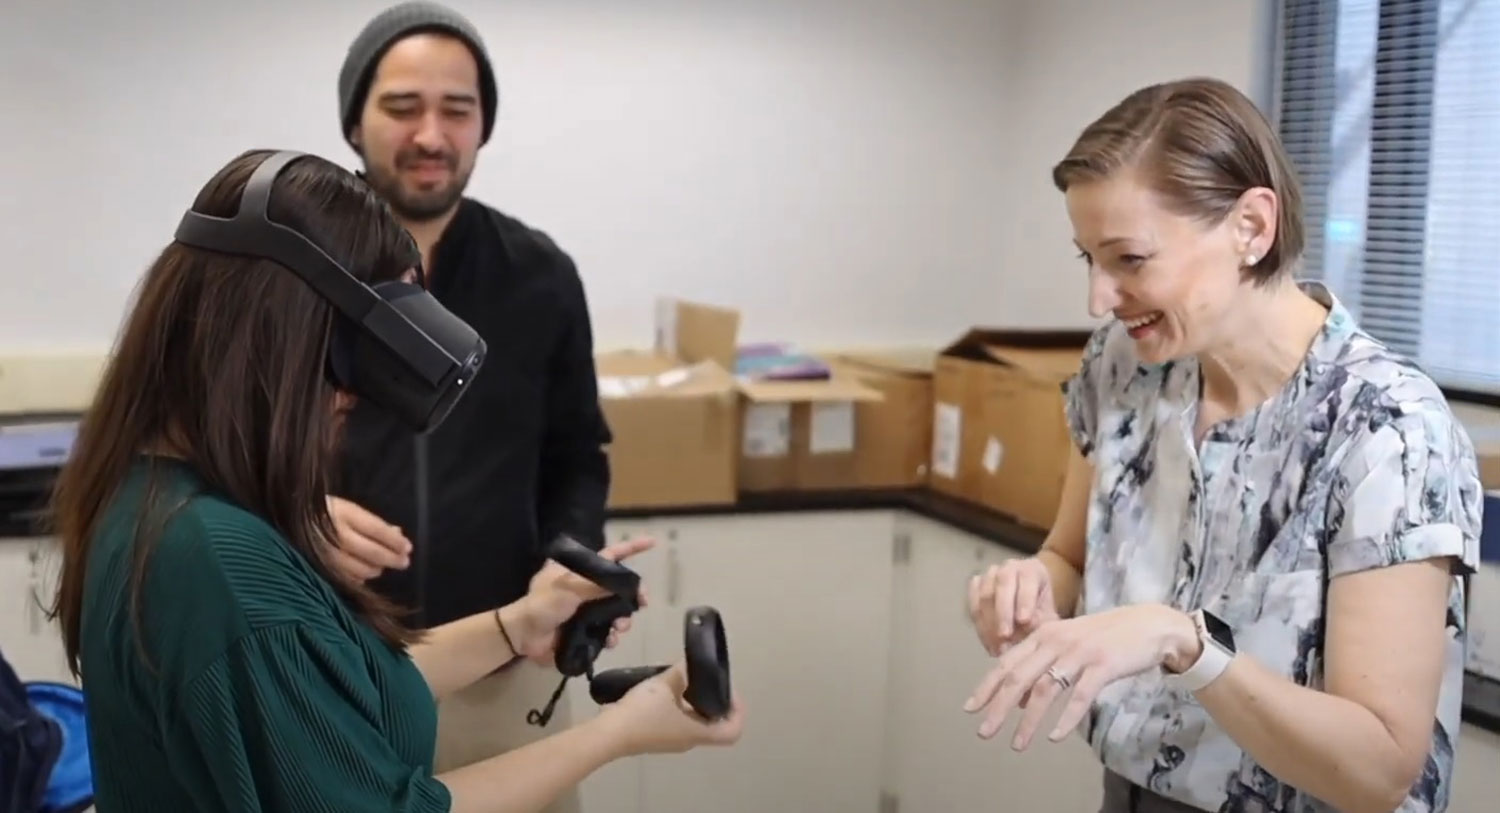 Tanya Hertz instructs a student on how to use virtual reality equipment